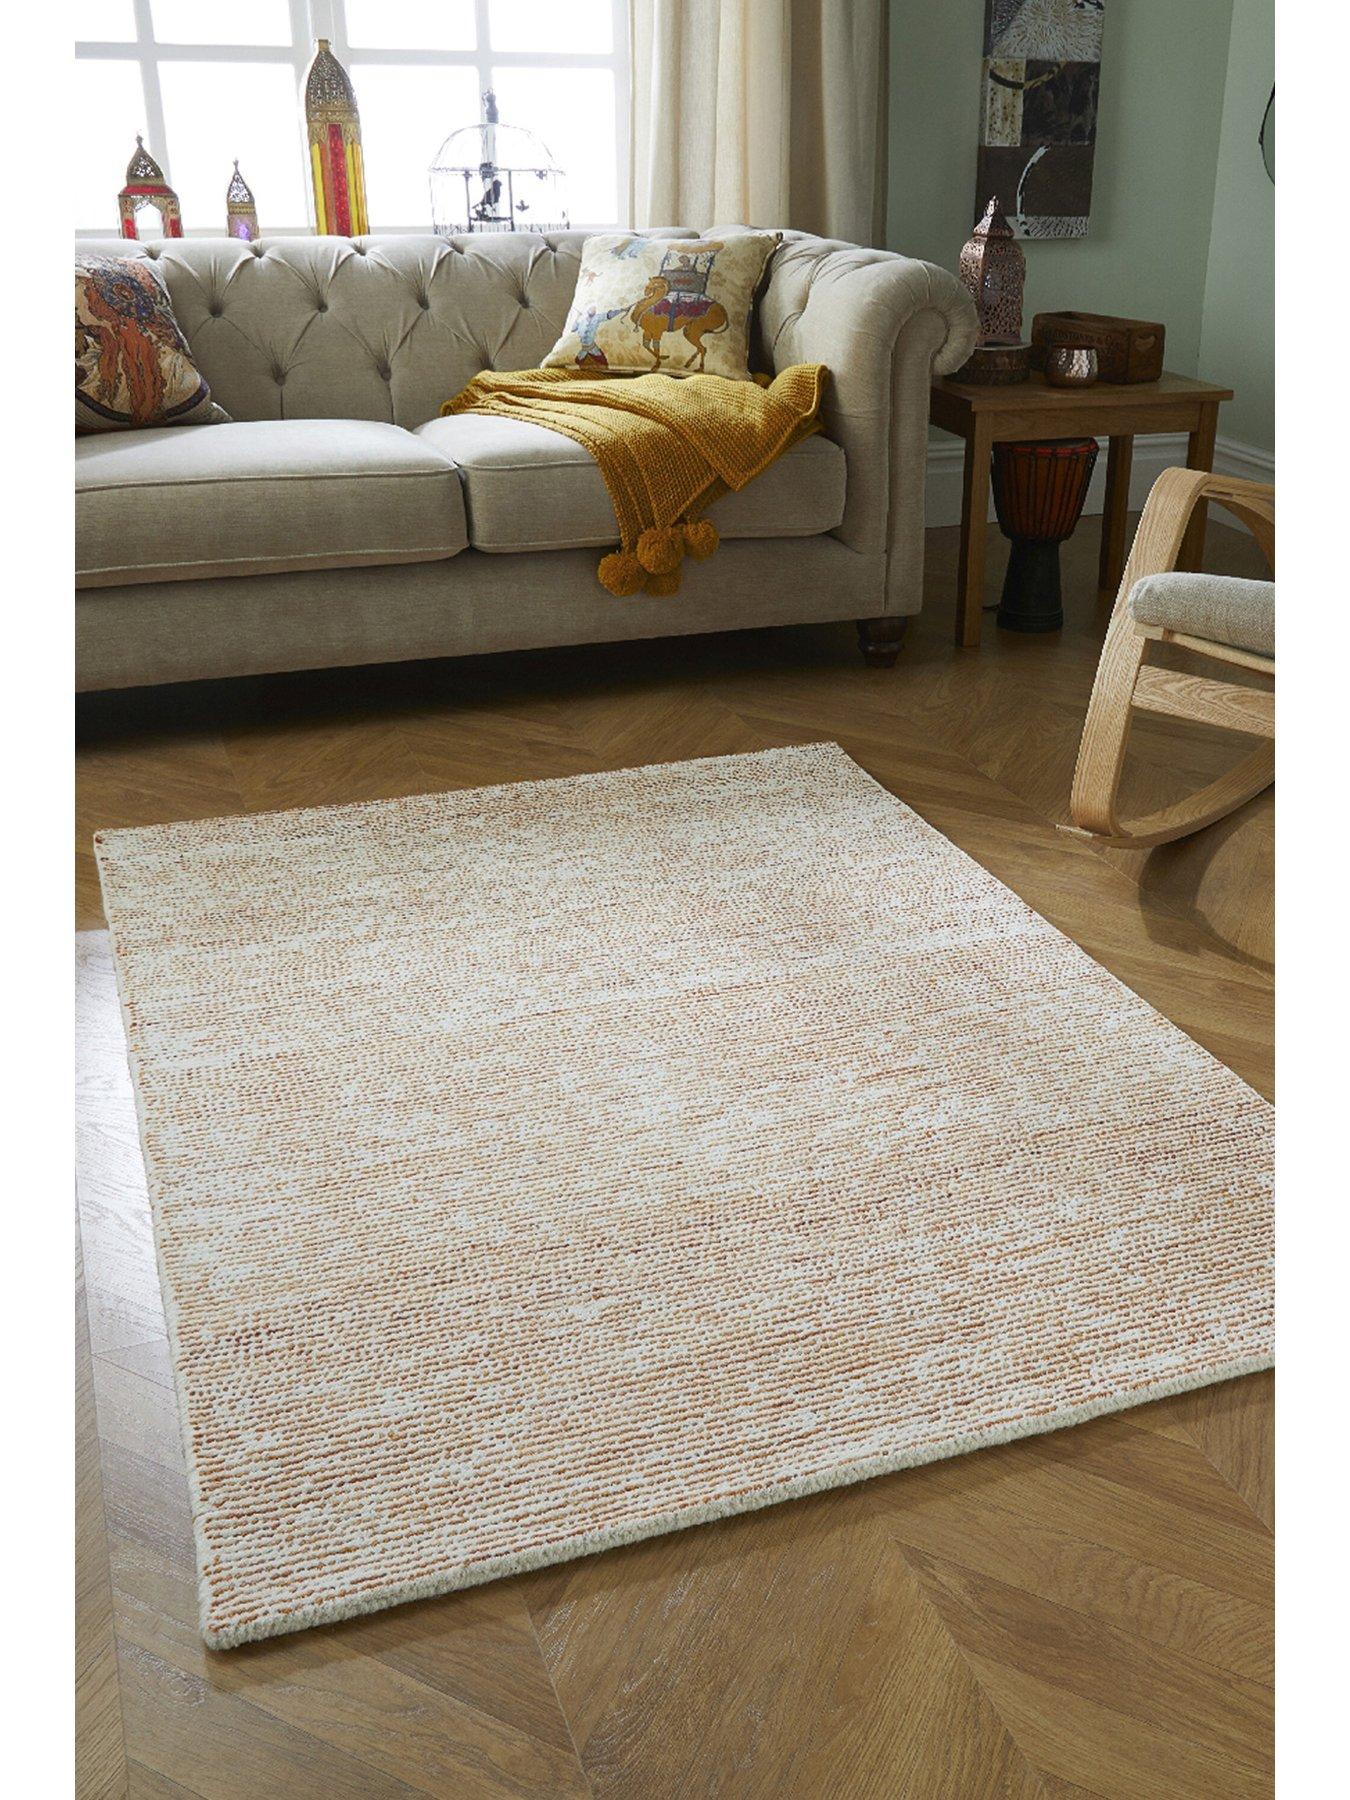 Cable Chunky Knitted Wool Rugs in Natural buy online from the rug